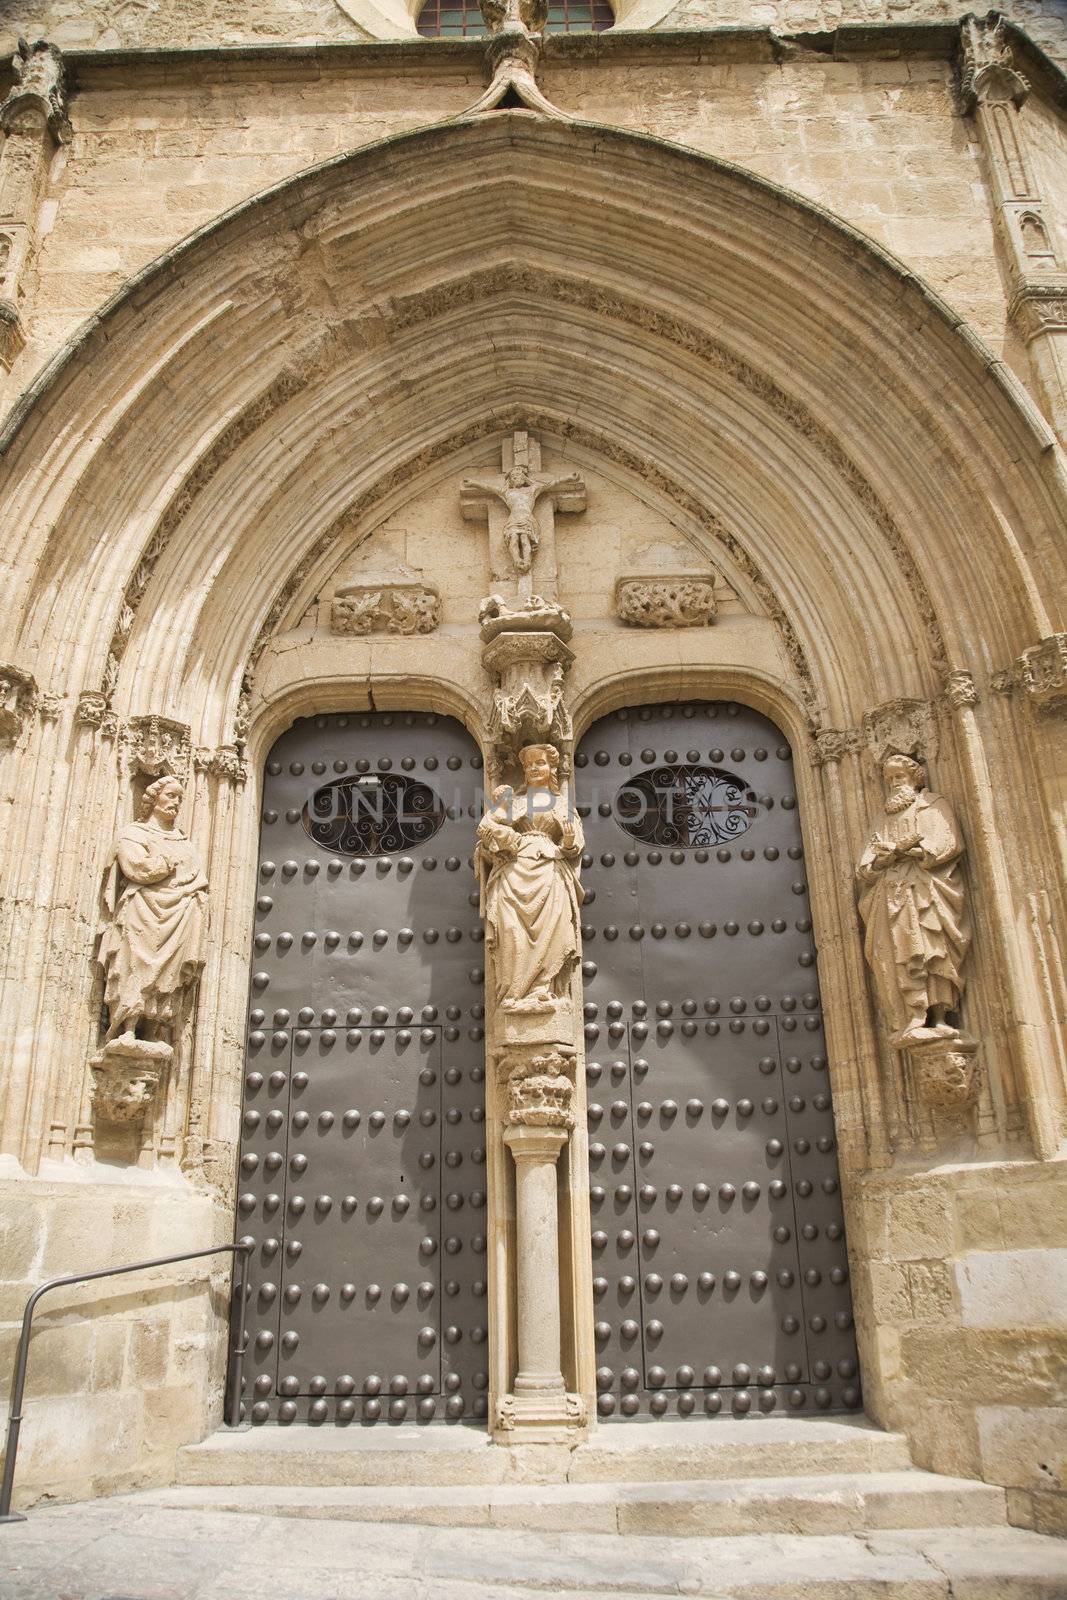 front door of a church at chinchilla village in albacete spain